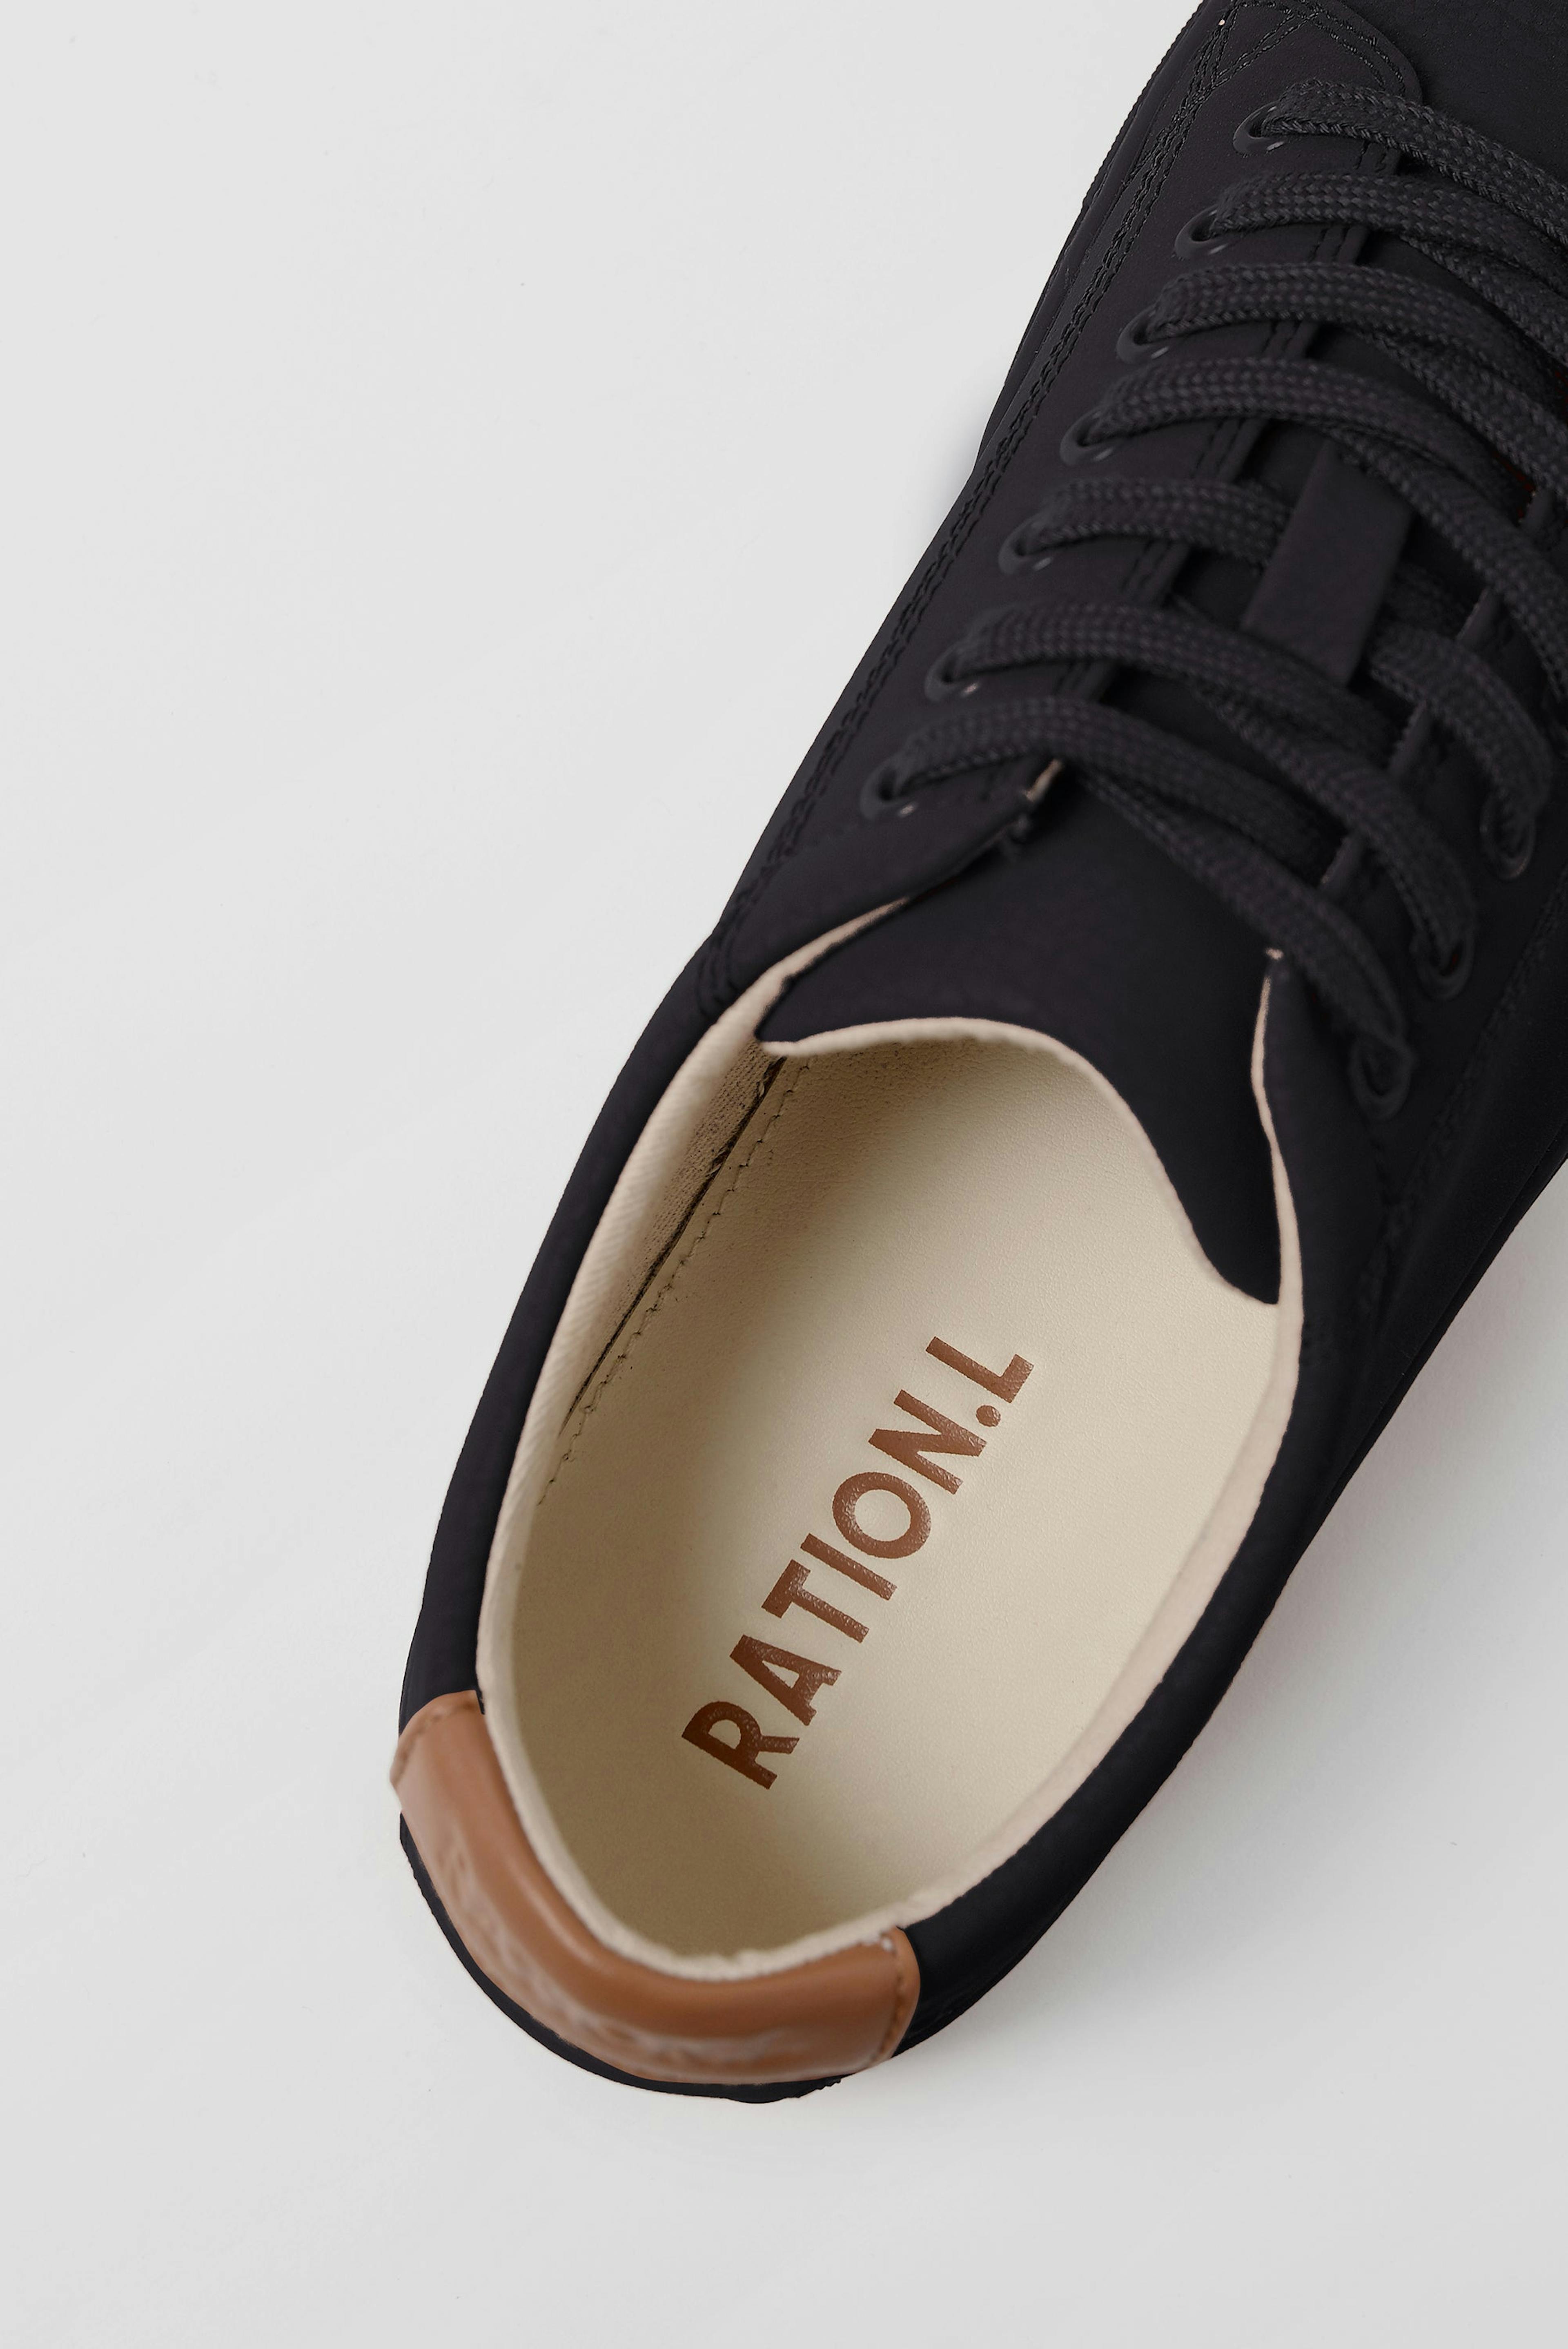 R-Kind | Certified Organic & Recycled Flat Trainer | Mercury Black Grained